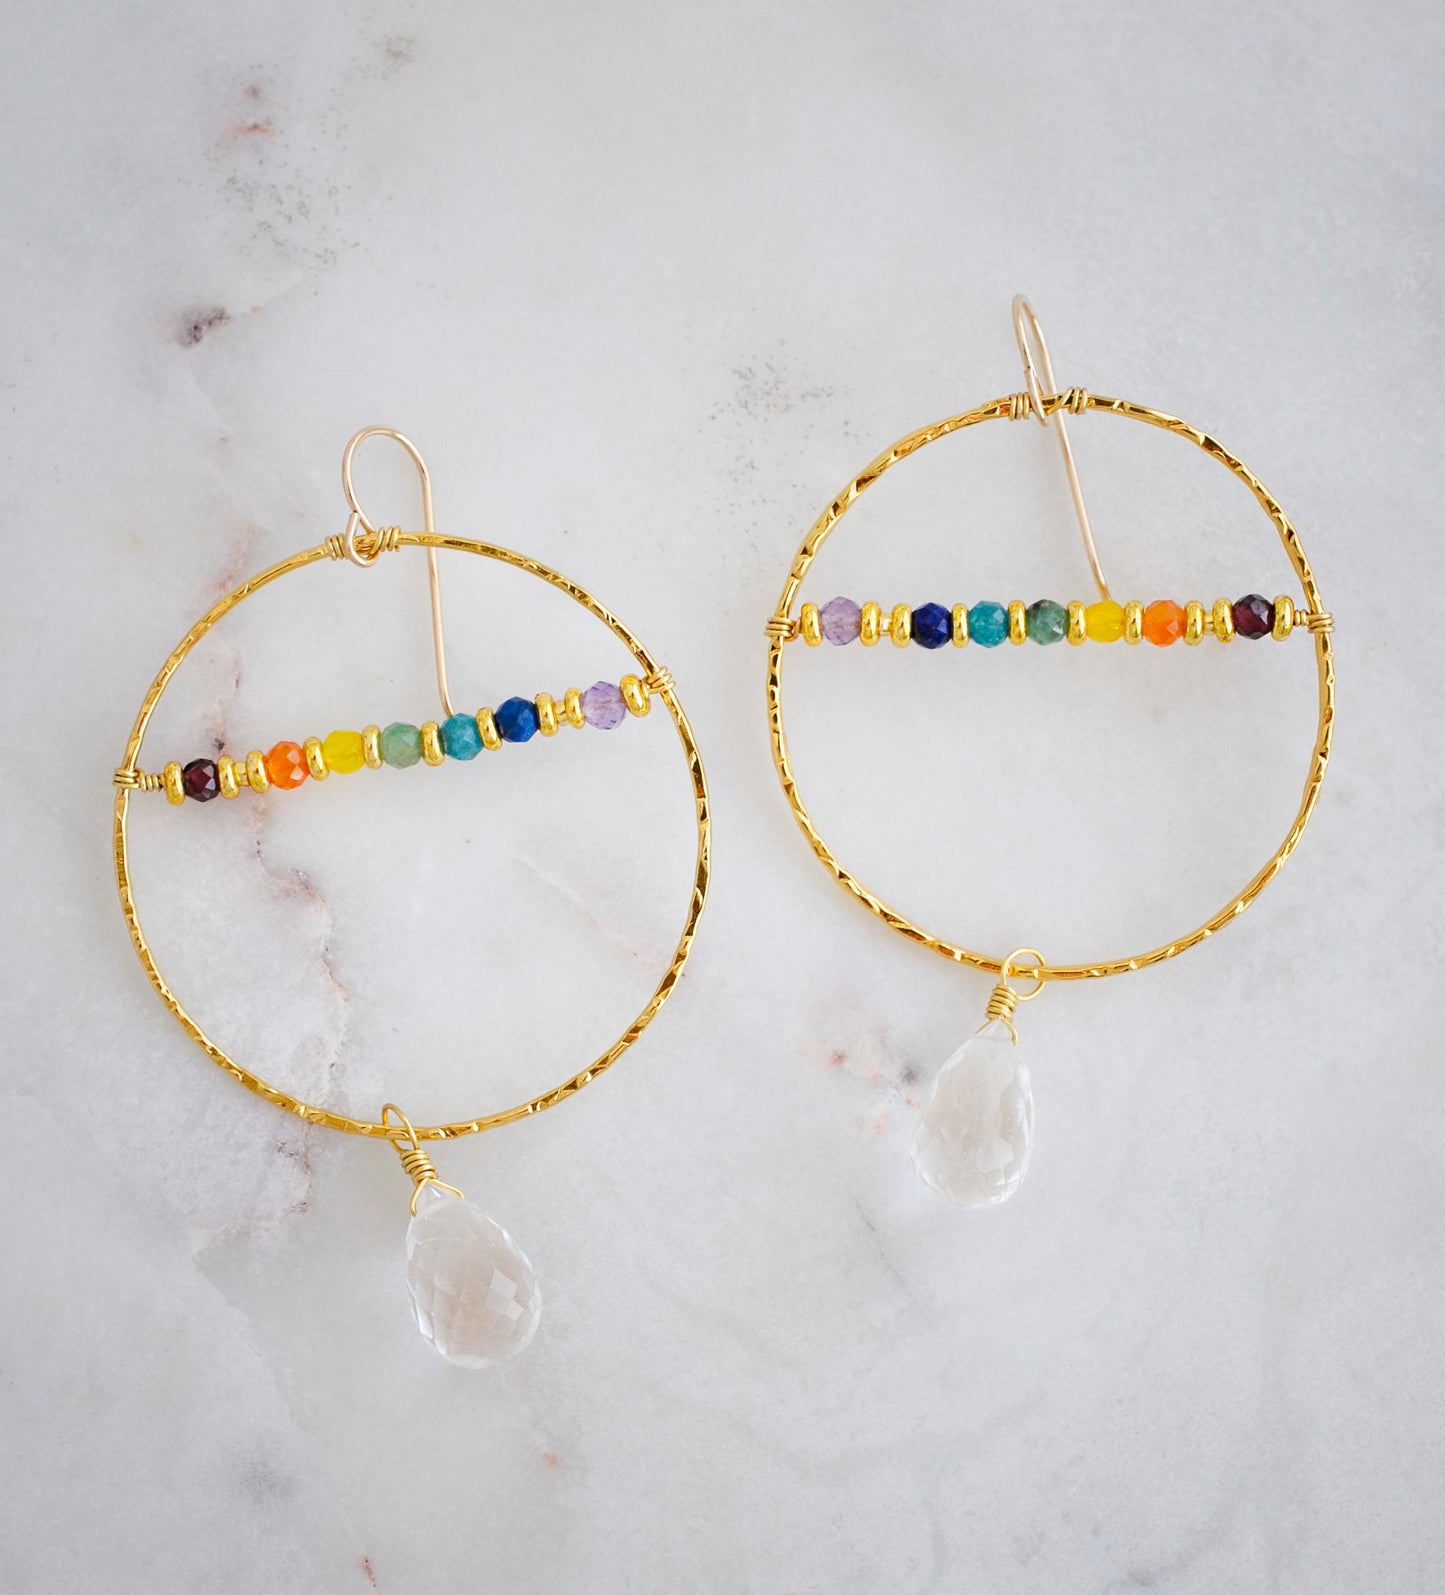 Large hammered hoop earrings with a bar of rainbow crystals spanning its center. The hoop is textured and has natural clear crystal quartz teardrop dangles. The gold style is shown.